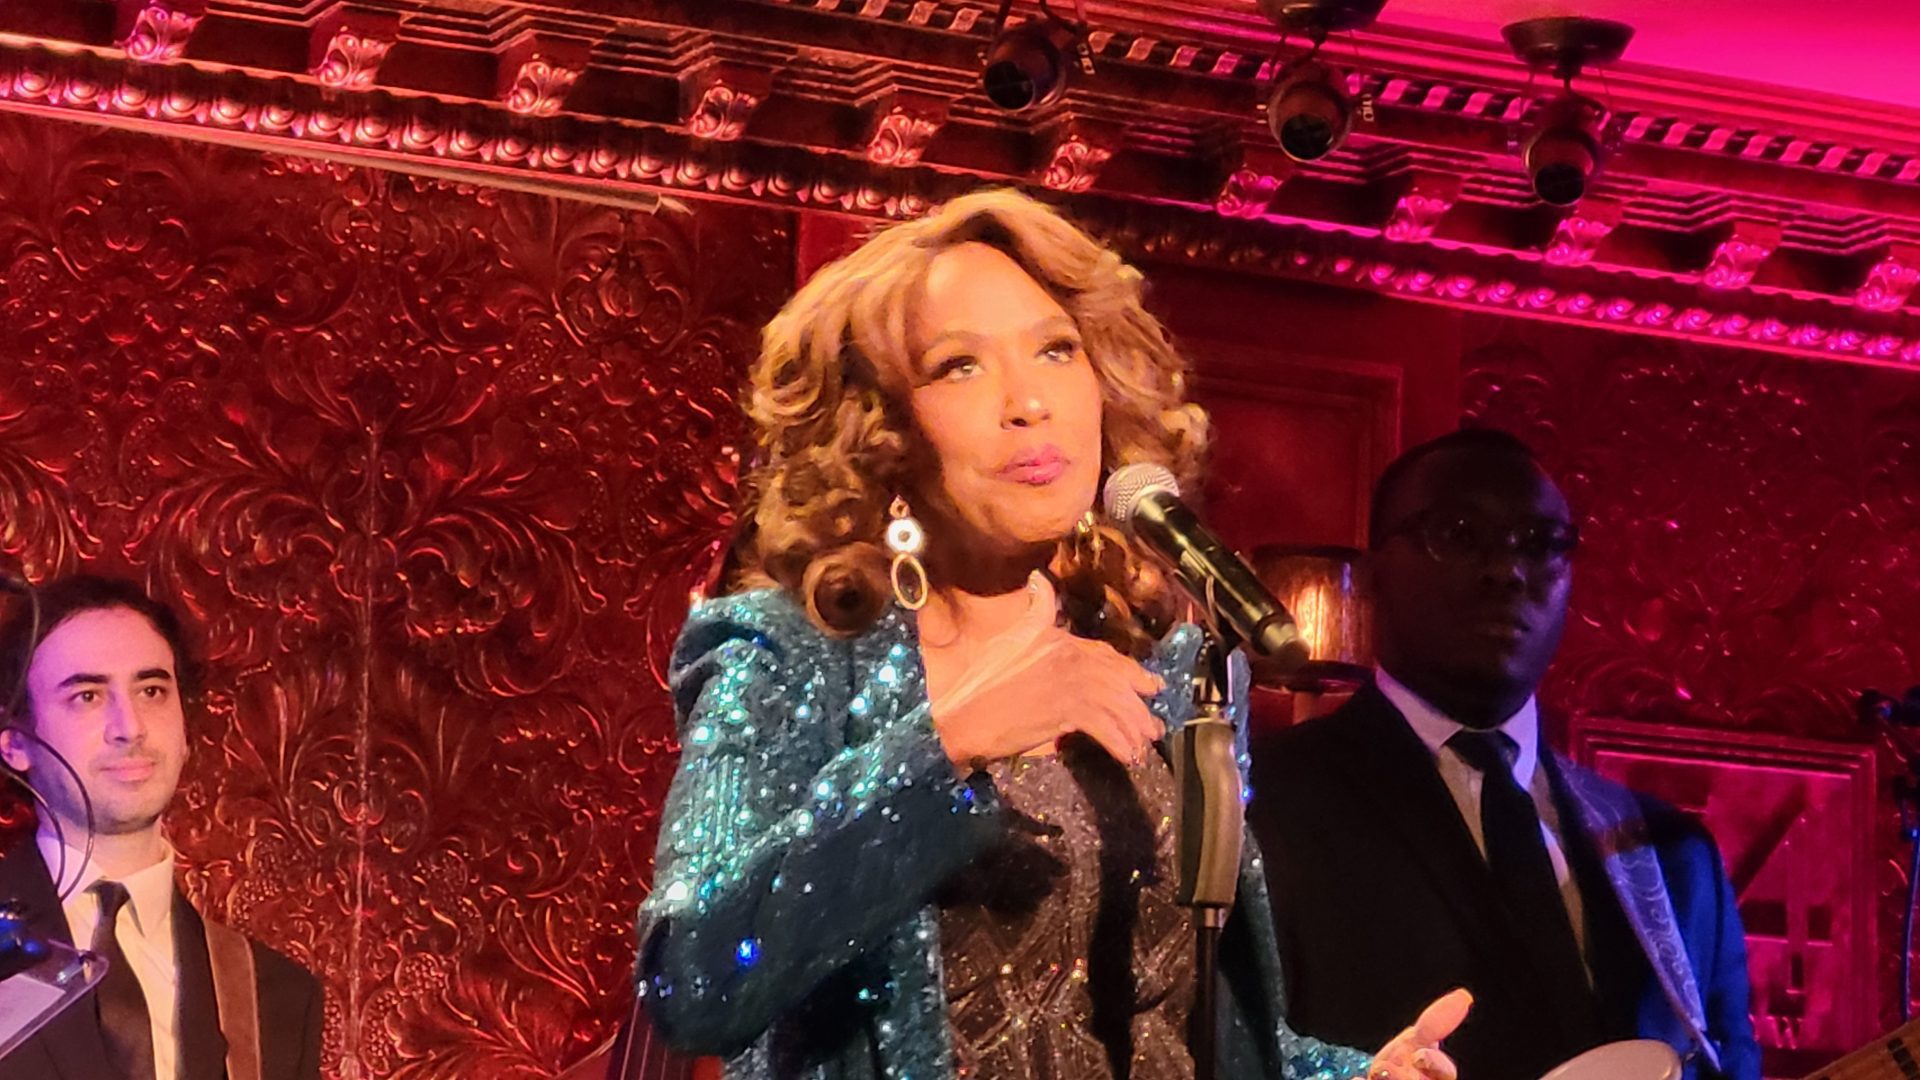 Jennifer Holliday is spectacular in intimate New York City performance